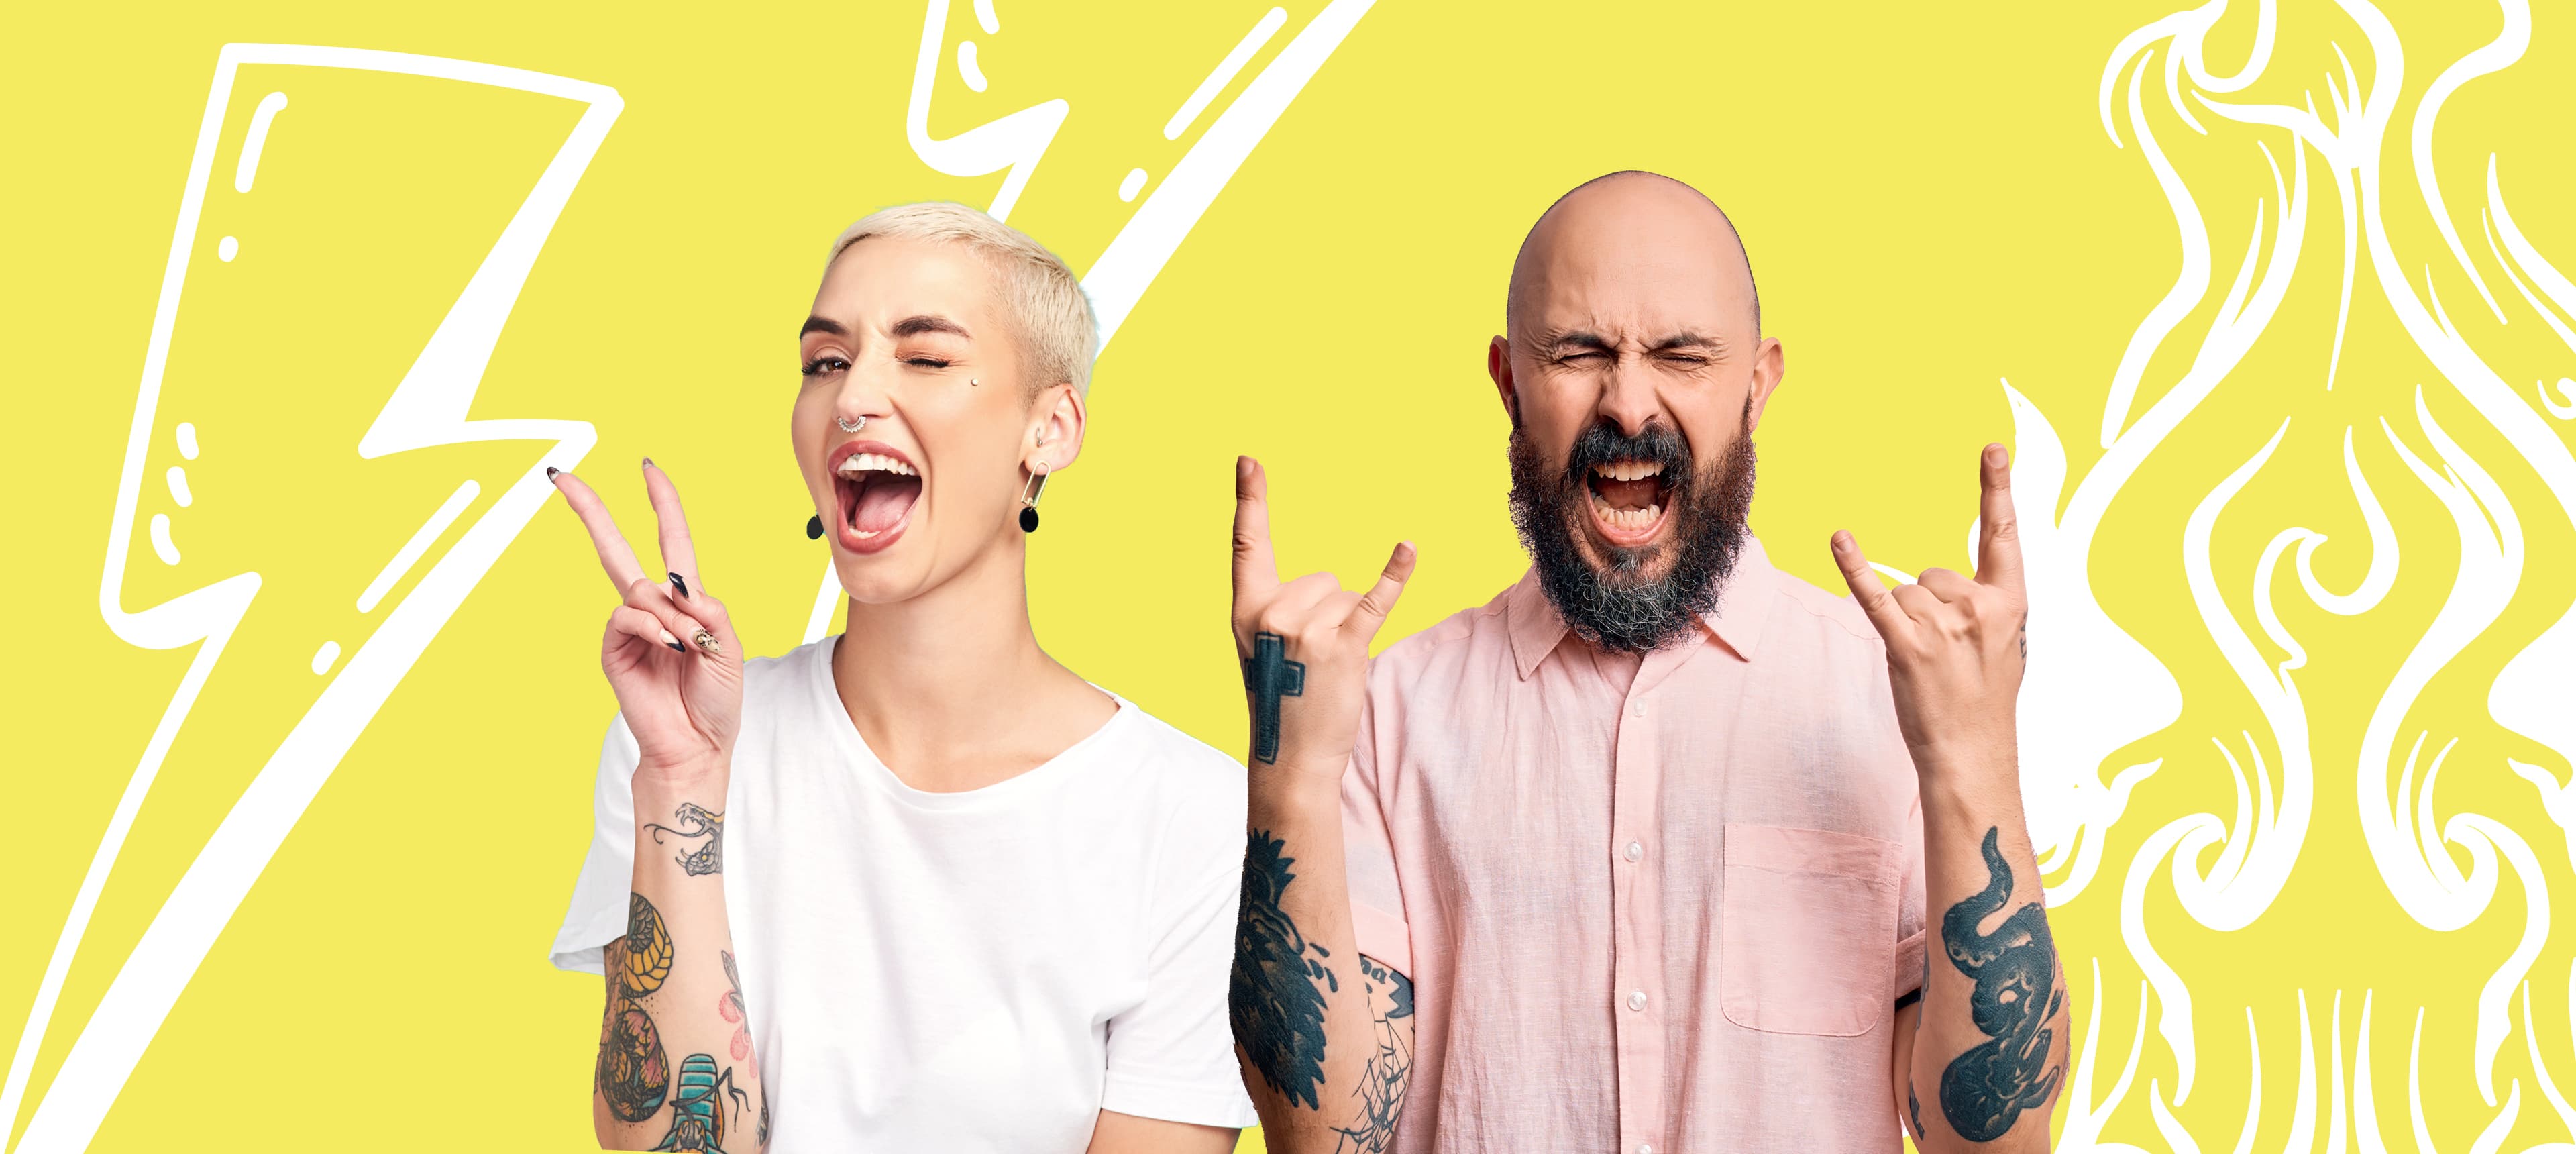 Bold and Grit - Woman and Man happy on a yellow background with text get ready to nail it.